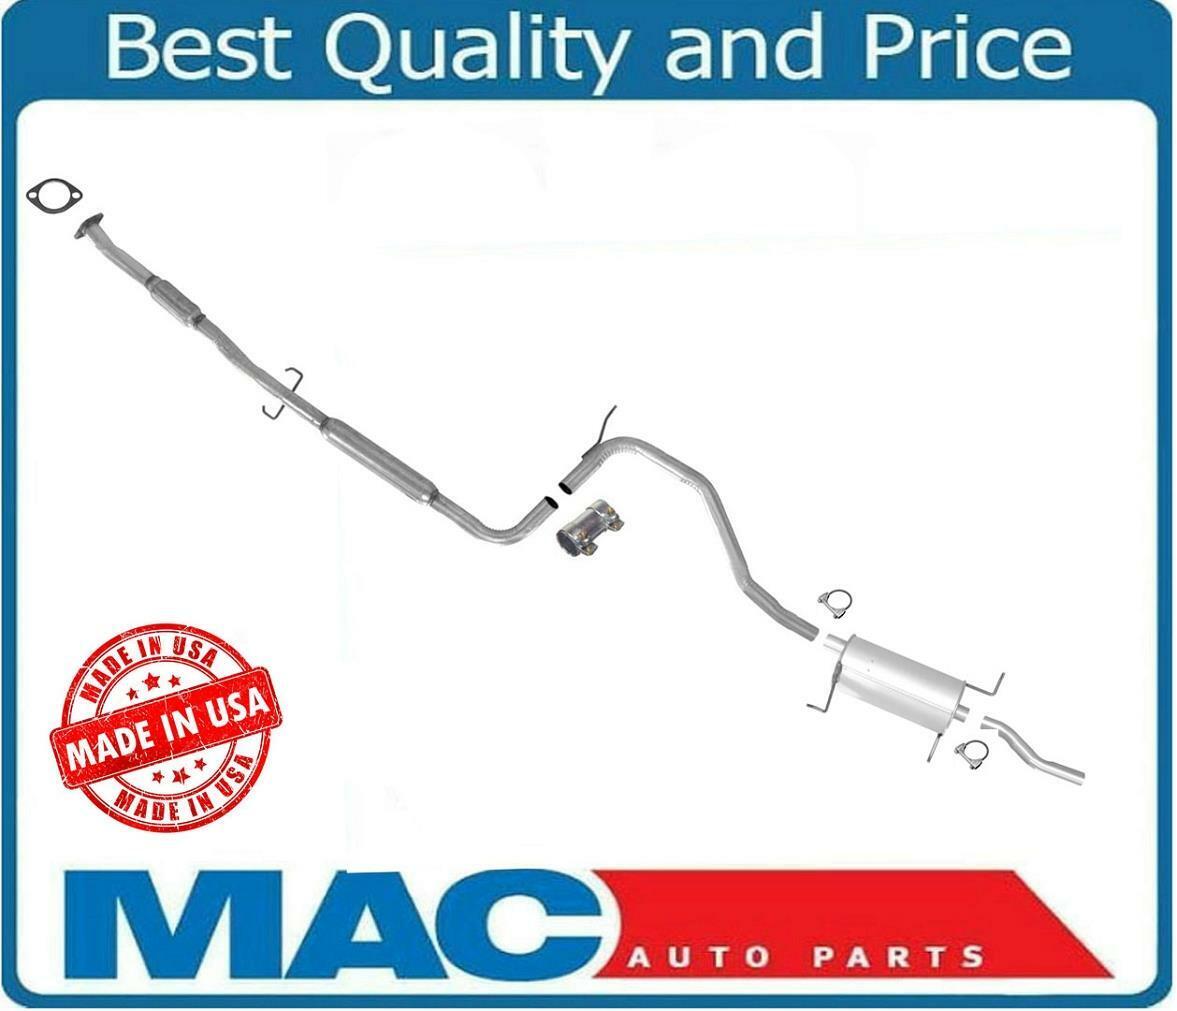 Muffler Exhaust System For Ford Escort MercuryTracer 1.9L 1991-1996